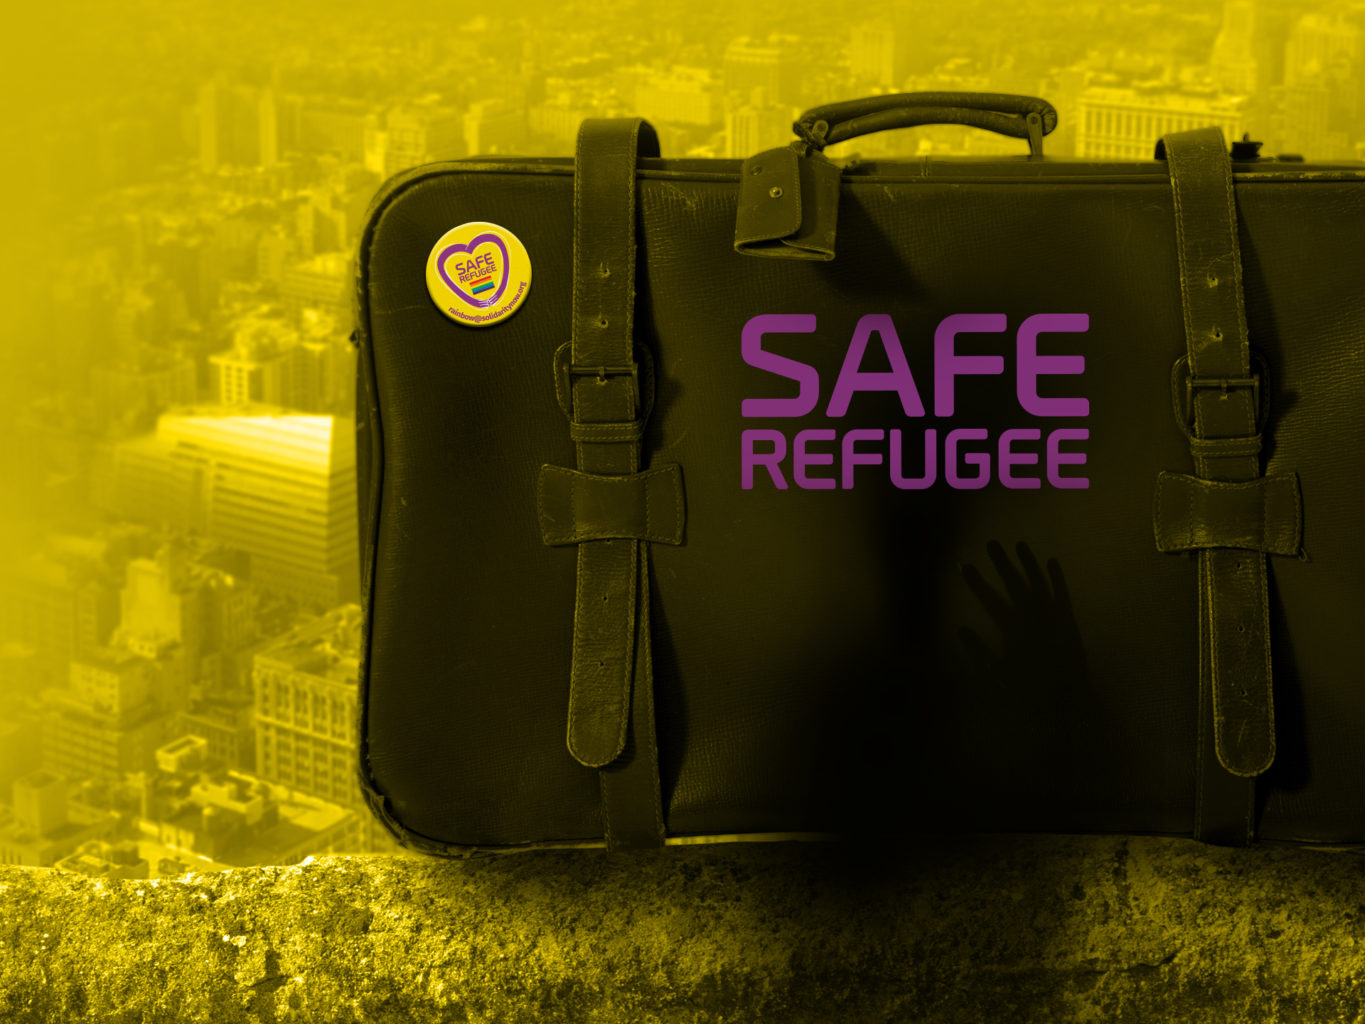 SolidarityNow - Solidarity Center suitcase safe refugee